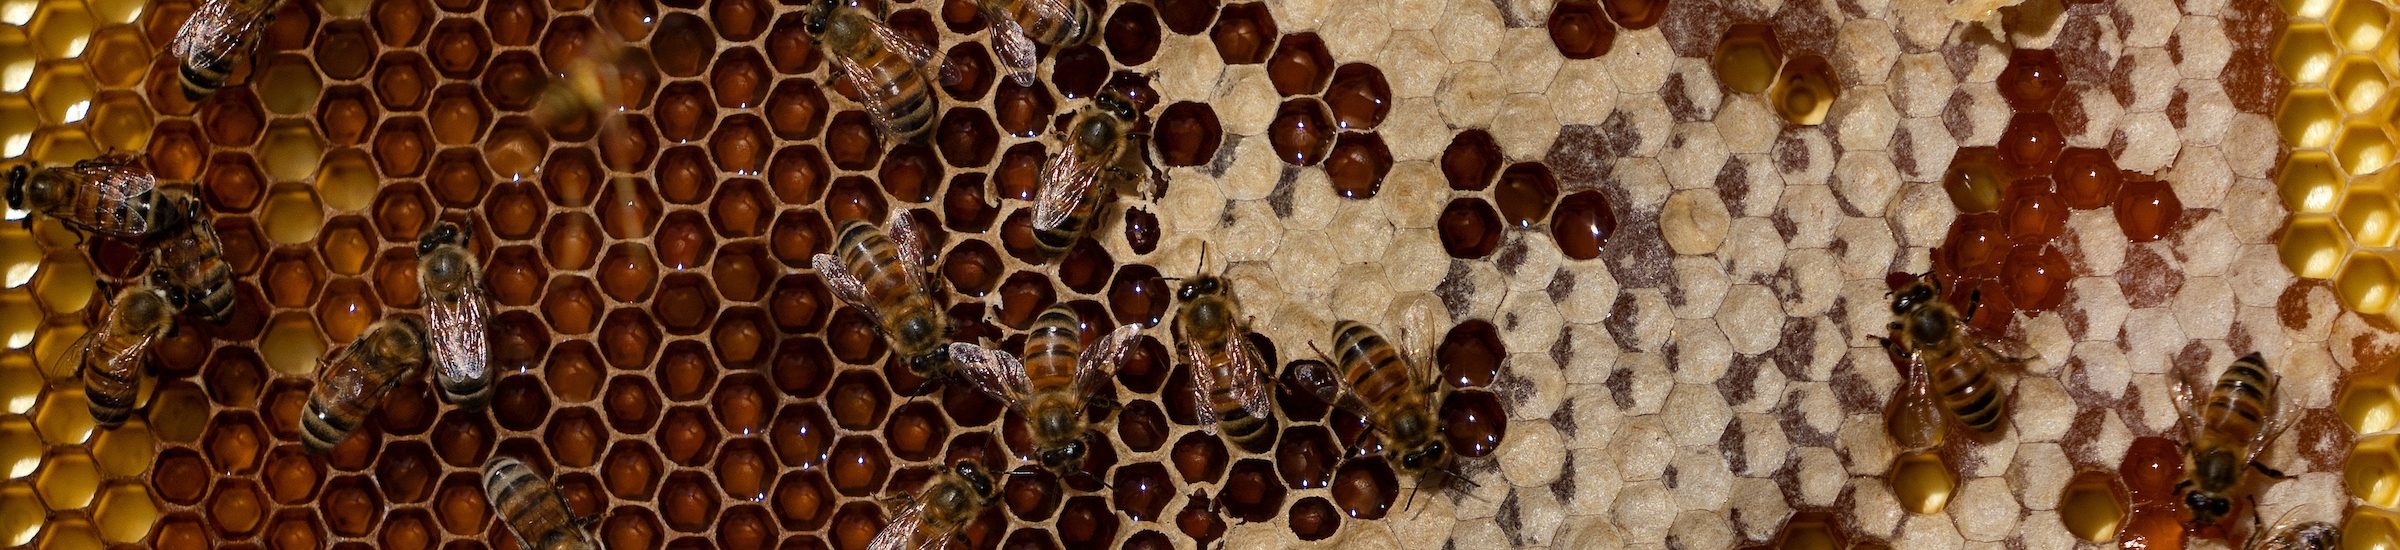 close up image of bees on a honeycomb